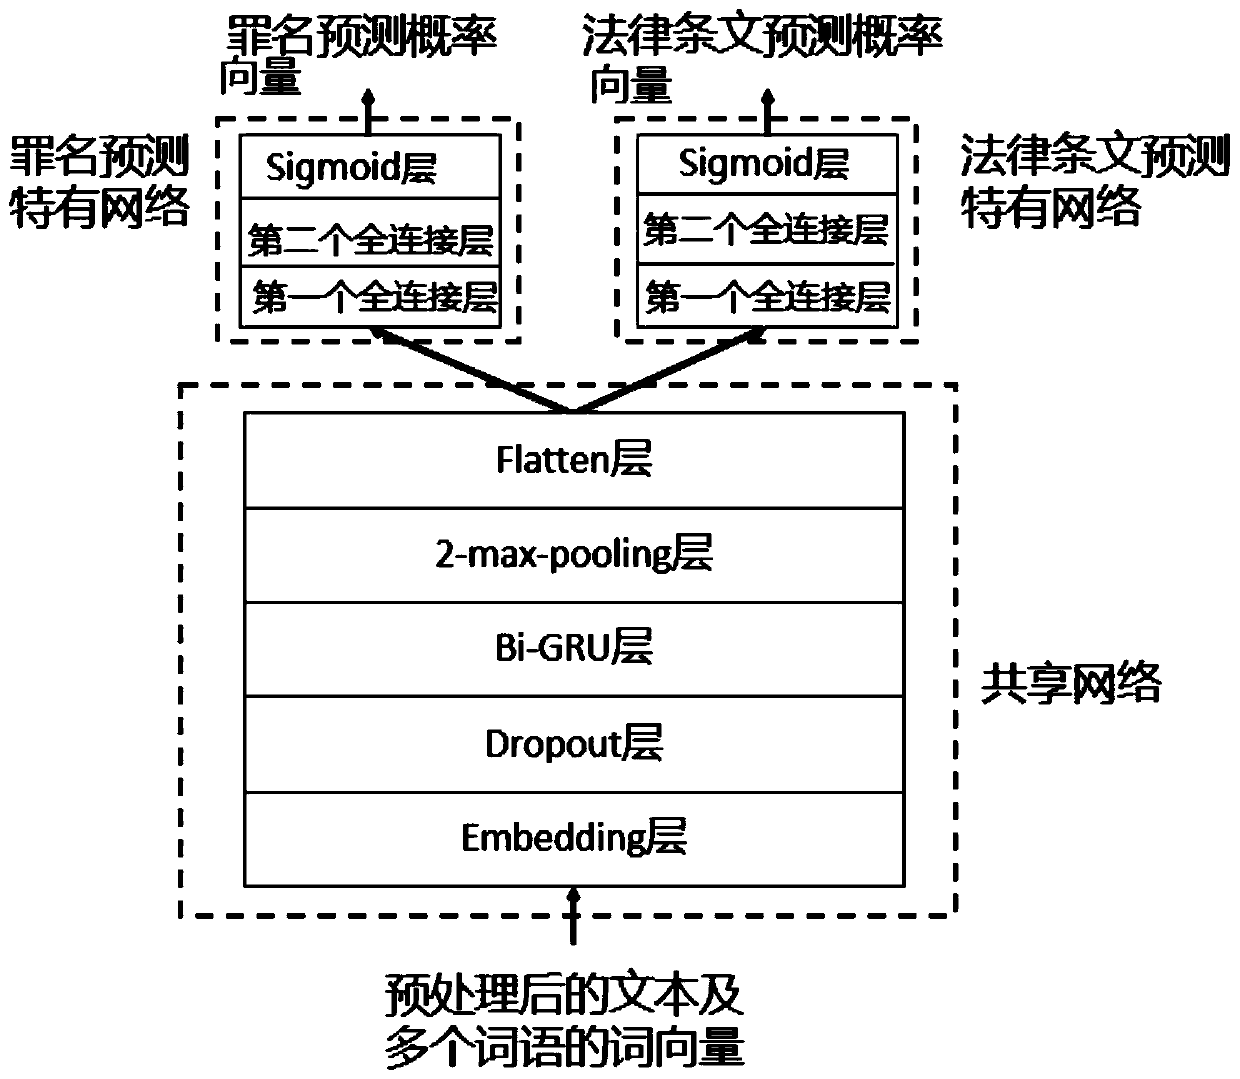 Multi-task network construction and multi-scale charge legal provision joint prediction method